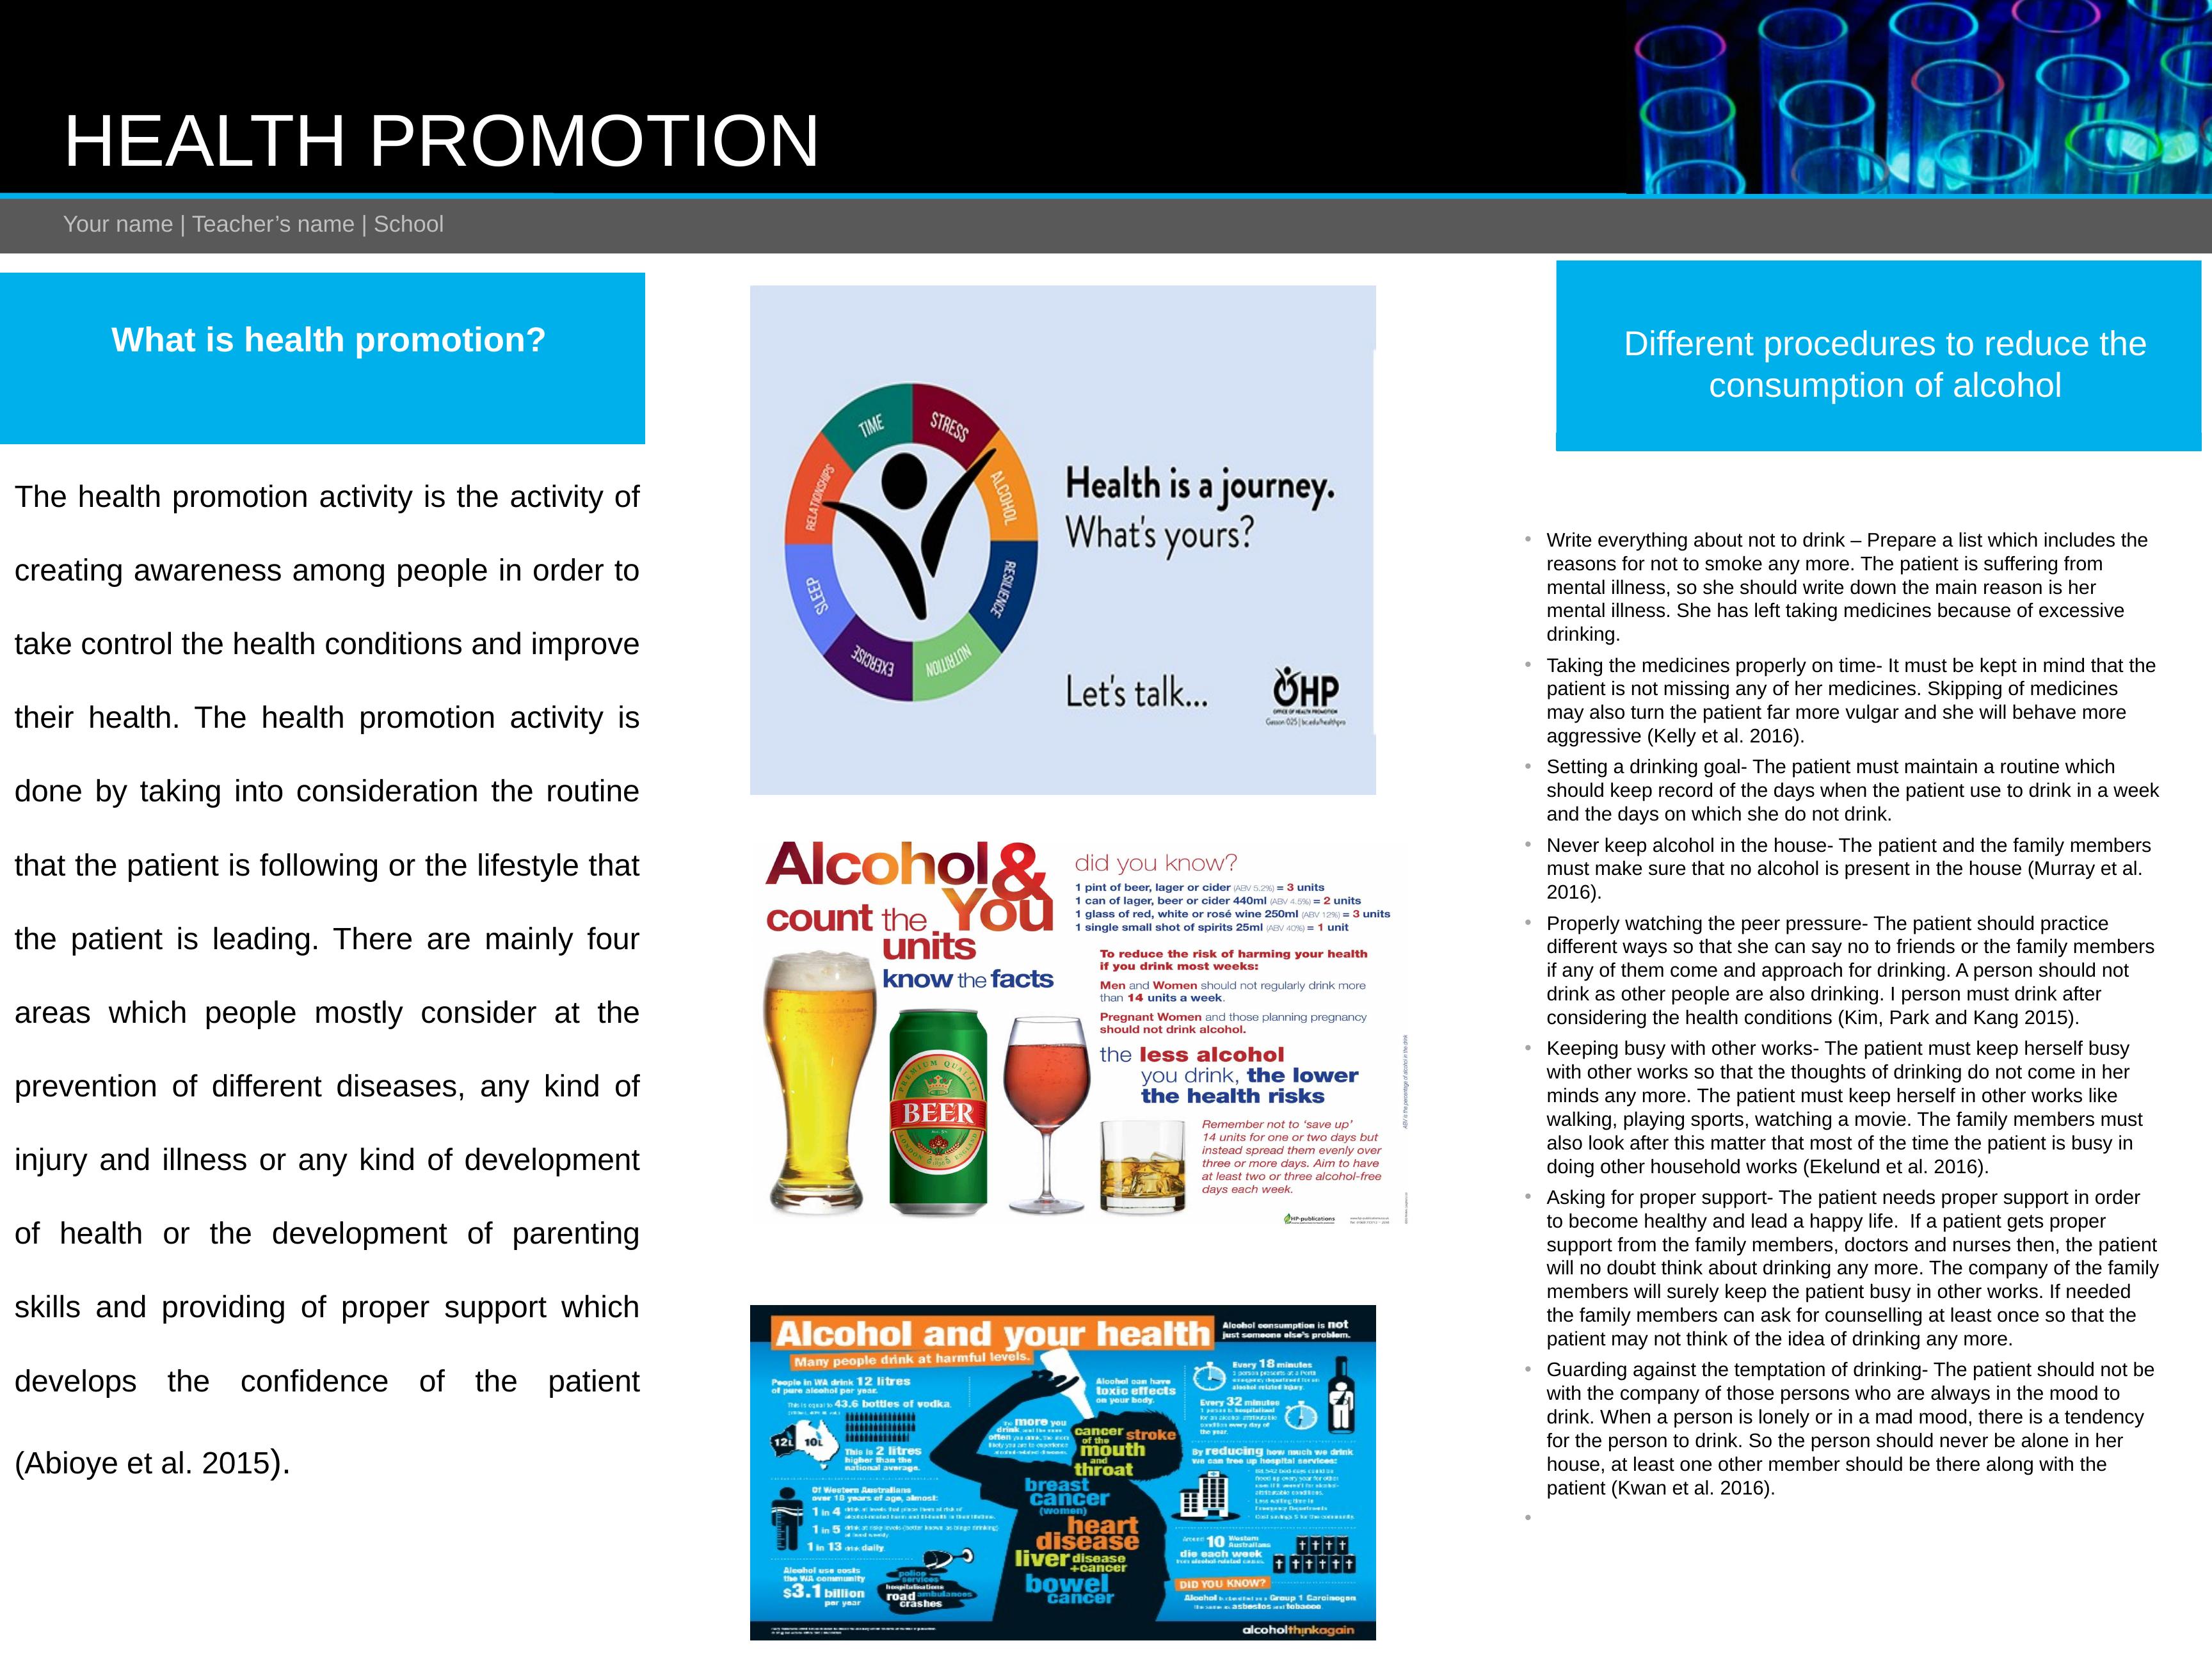 Health Promotion: Procedures to Reduce Alcohol Consumption_1